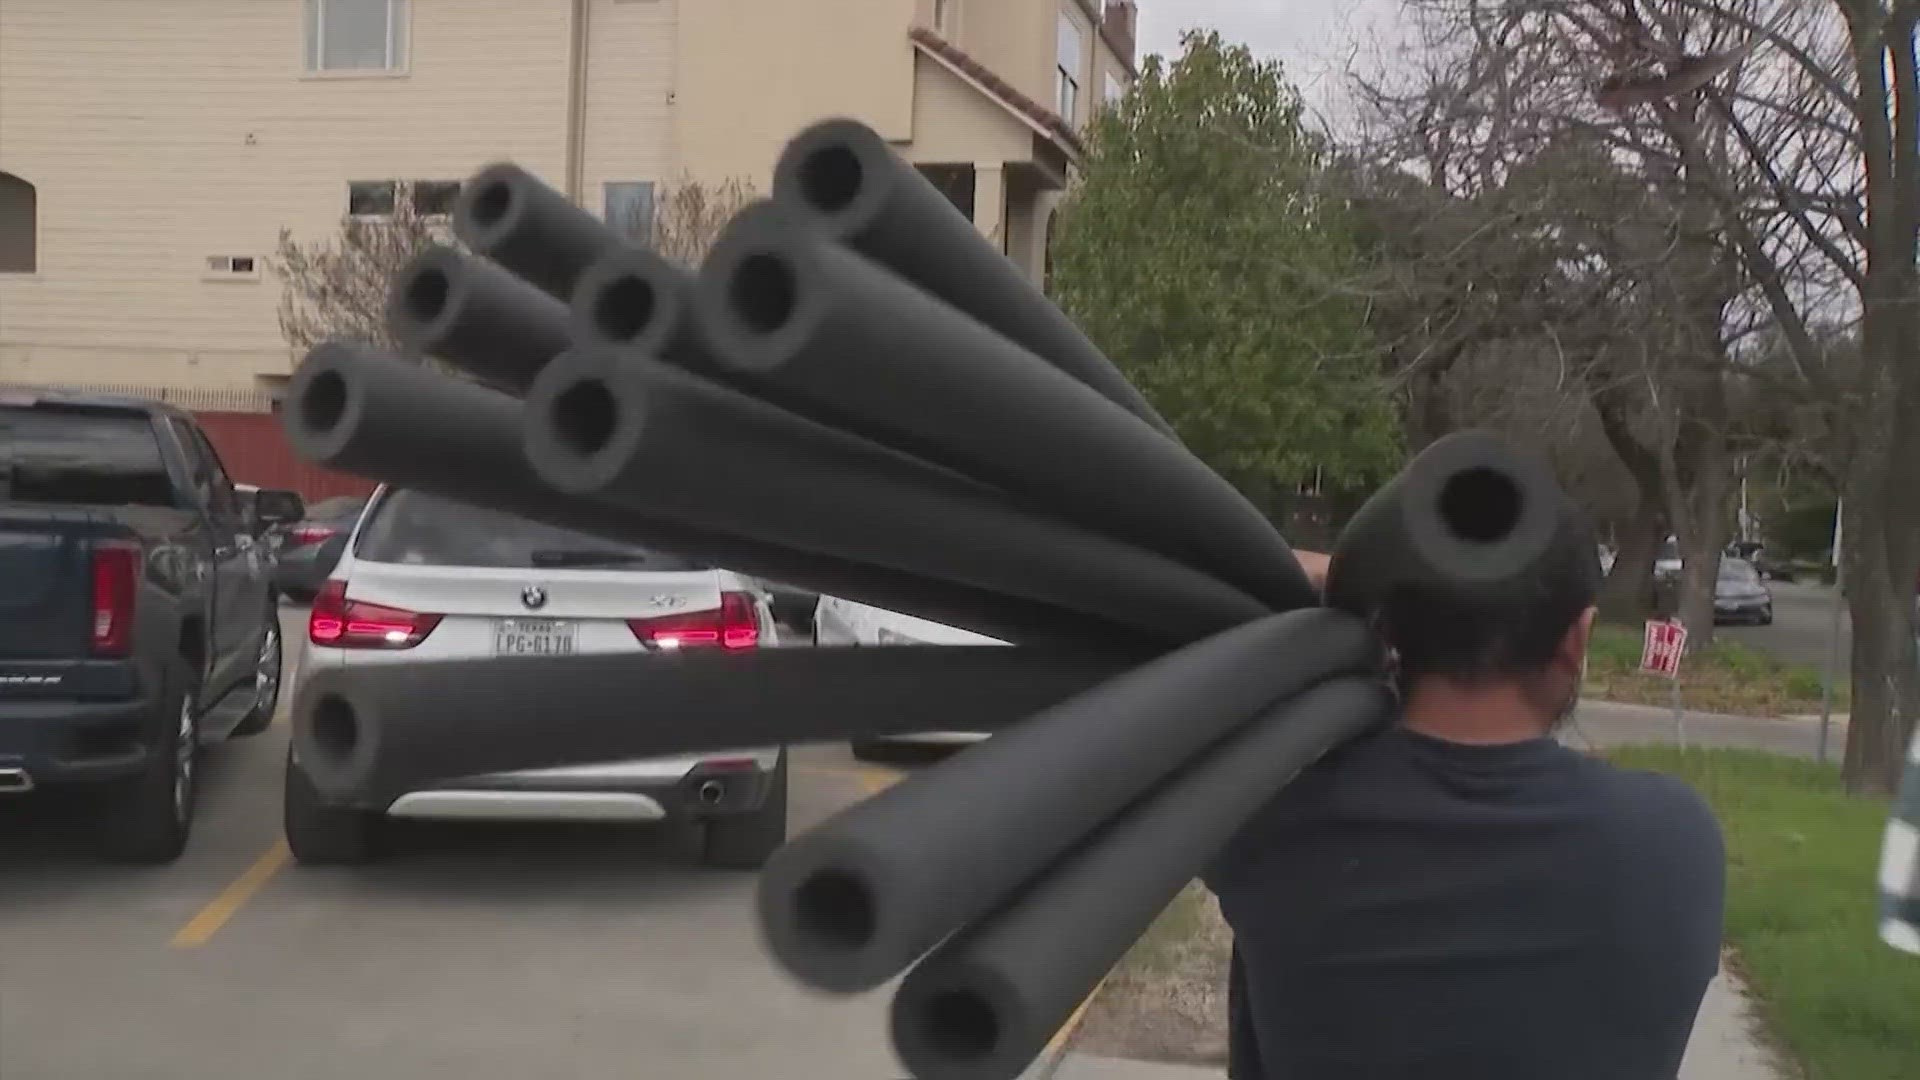 At C&D Hardware and Gifts in the Heights, residents were seen picking up pipe installations.